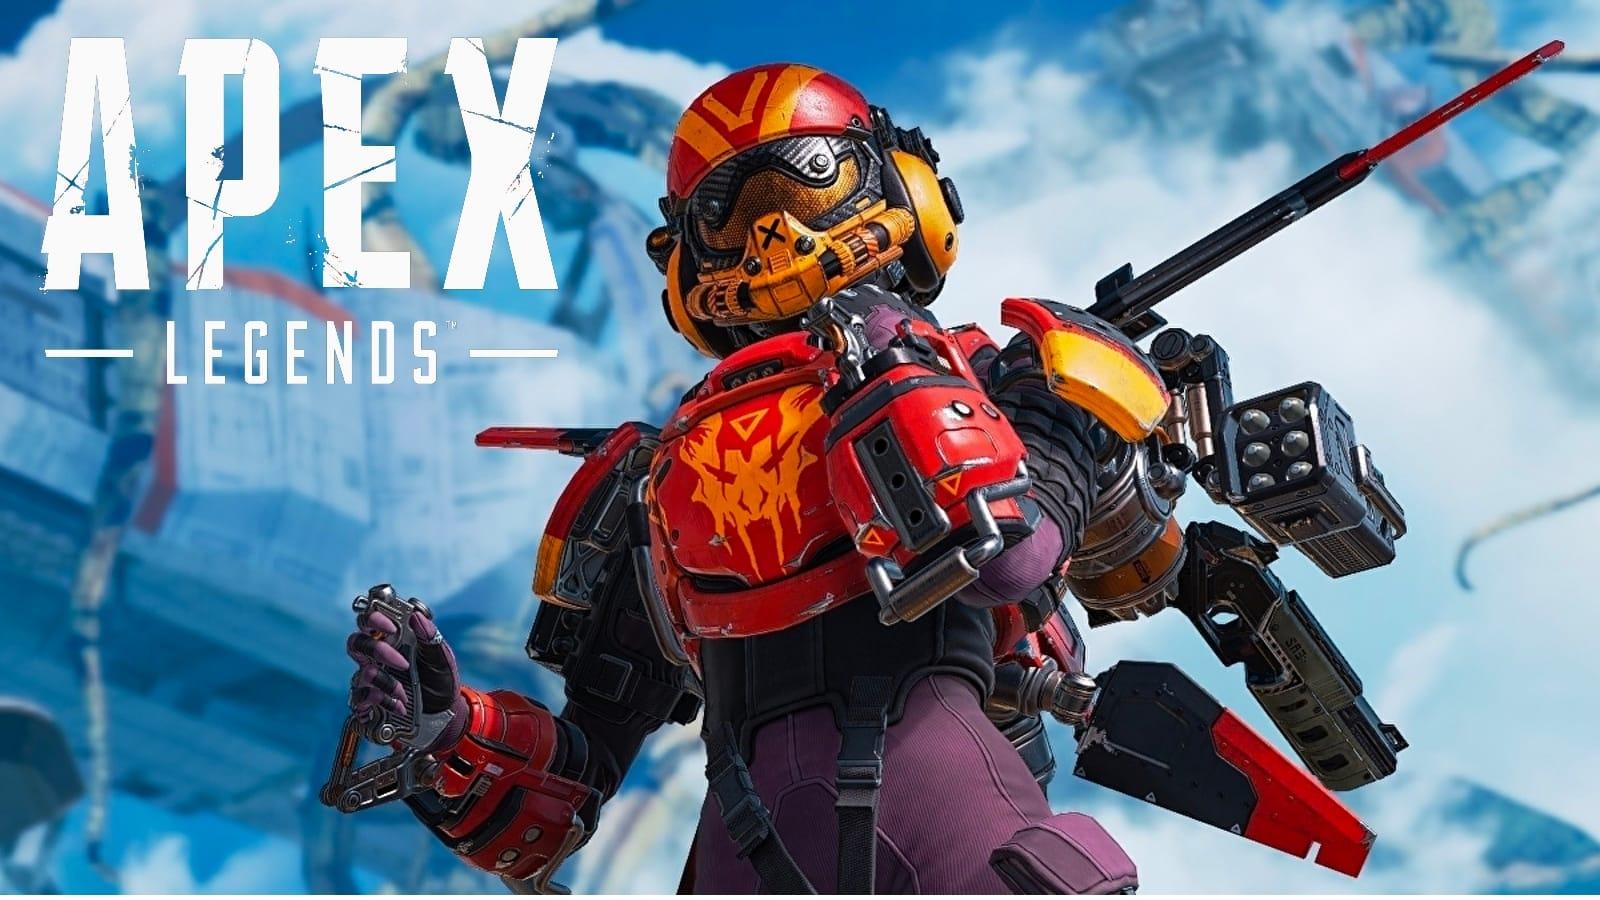 Apex Legends Twitch Prime Caustic skin: How to claim the new Twitch Prime  loot? - Daily Star